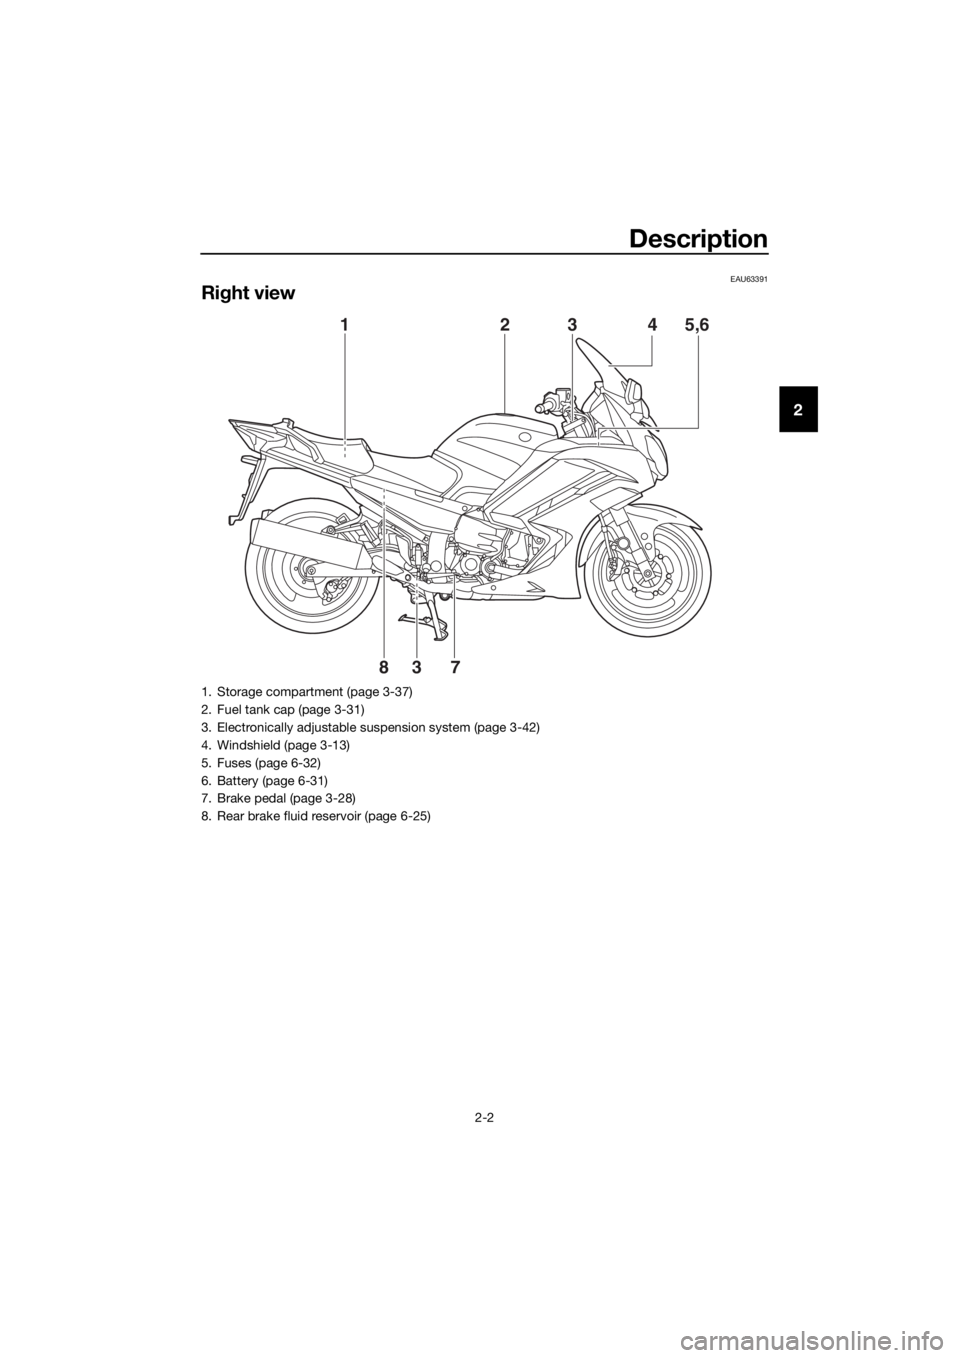 YAMAHA FJR1300AS 2018  Owners Manual Description
2-2
2
EAU63391
Right view
78 5,6
4
23
1
3
1. Storage compartment (page 3-37)
2. Fuel tank cap (page 3-31)
3. Electronically adjustable suspension system (page 3-42)
4. Windshield (page 3-1